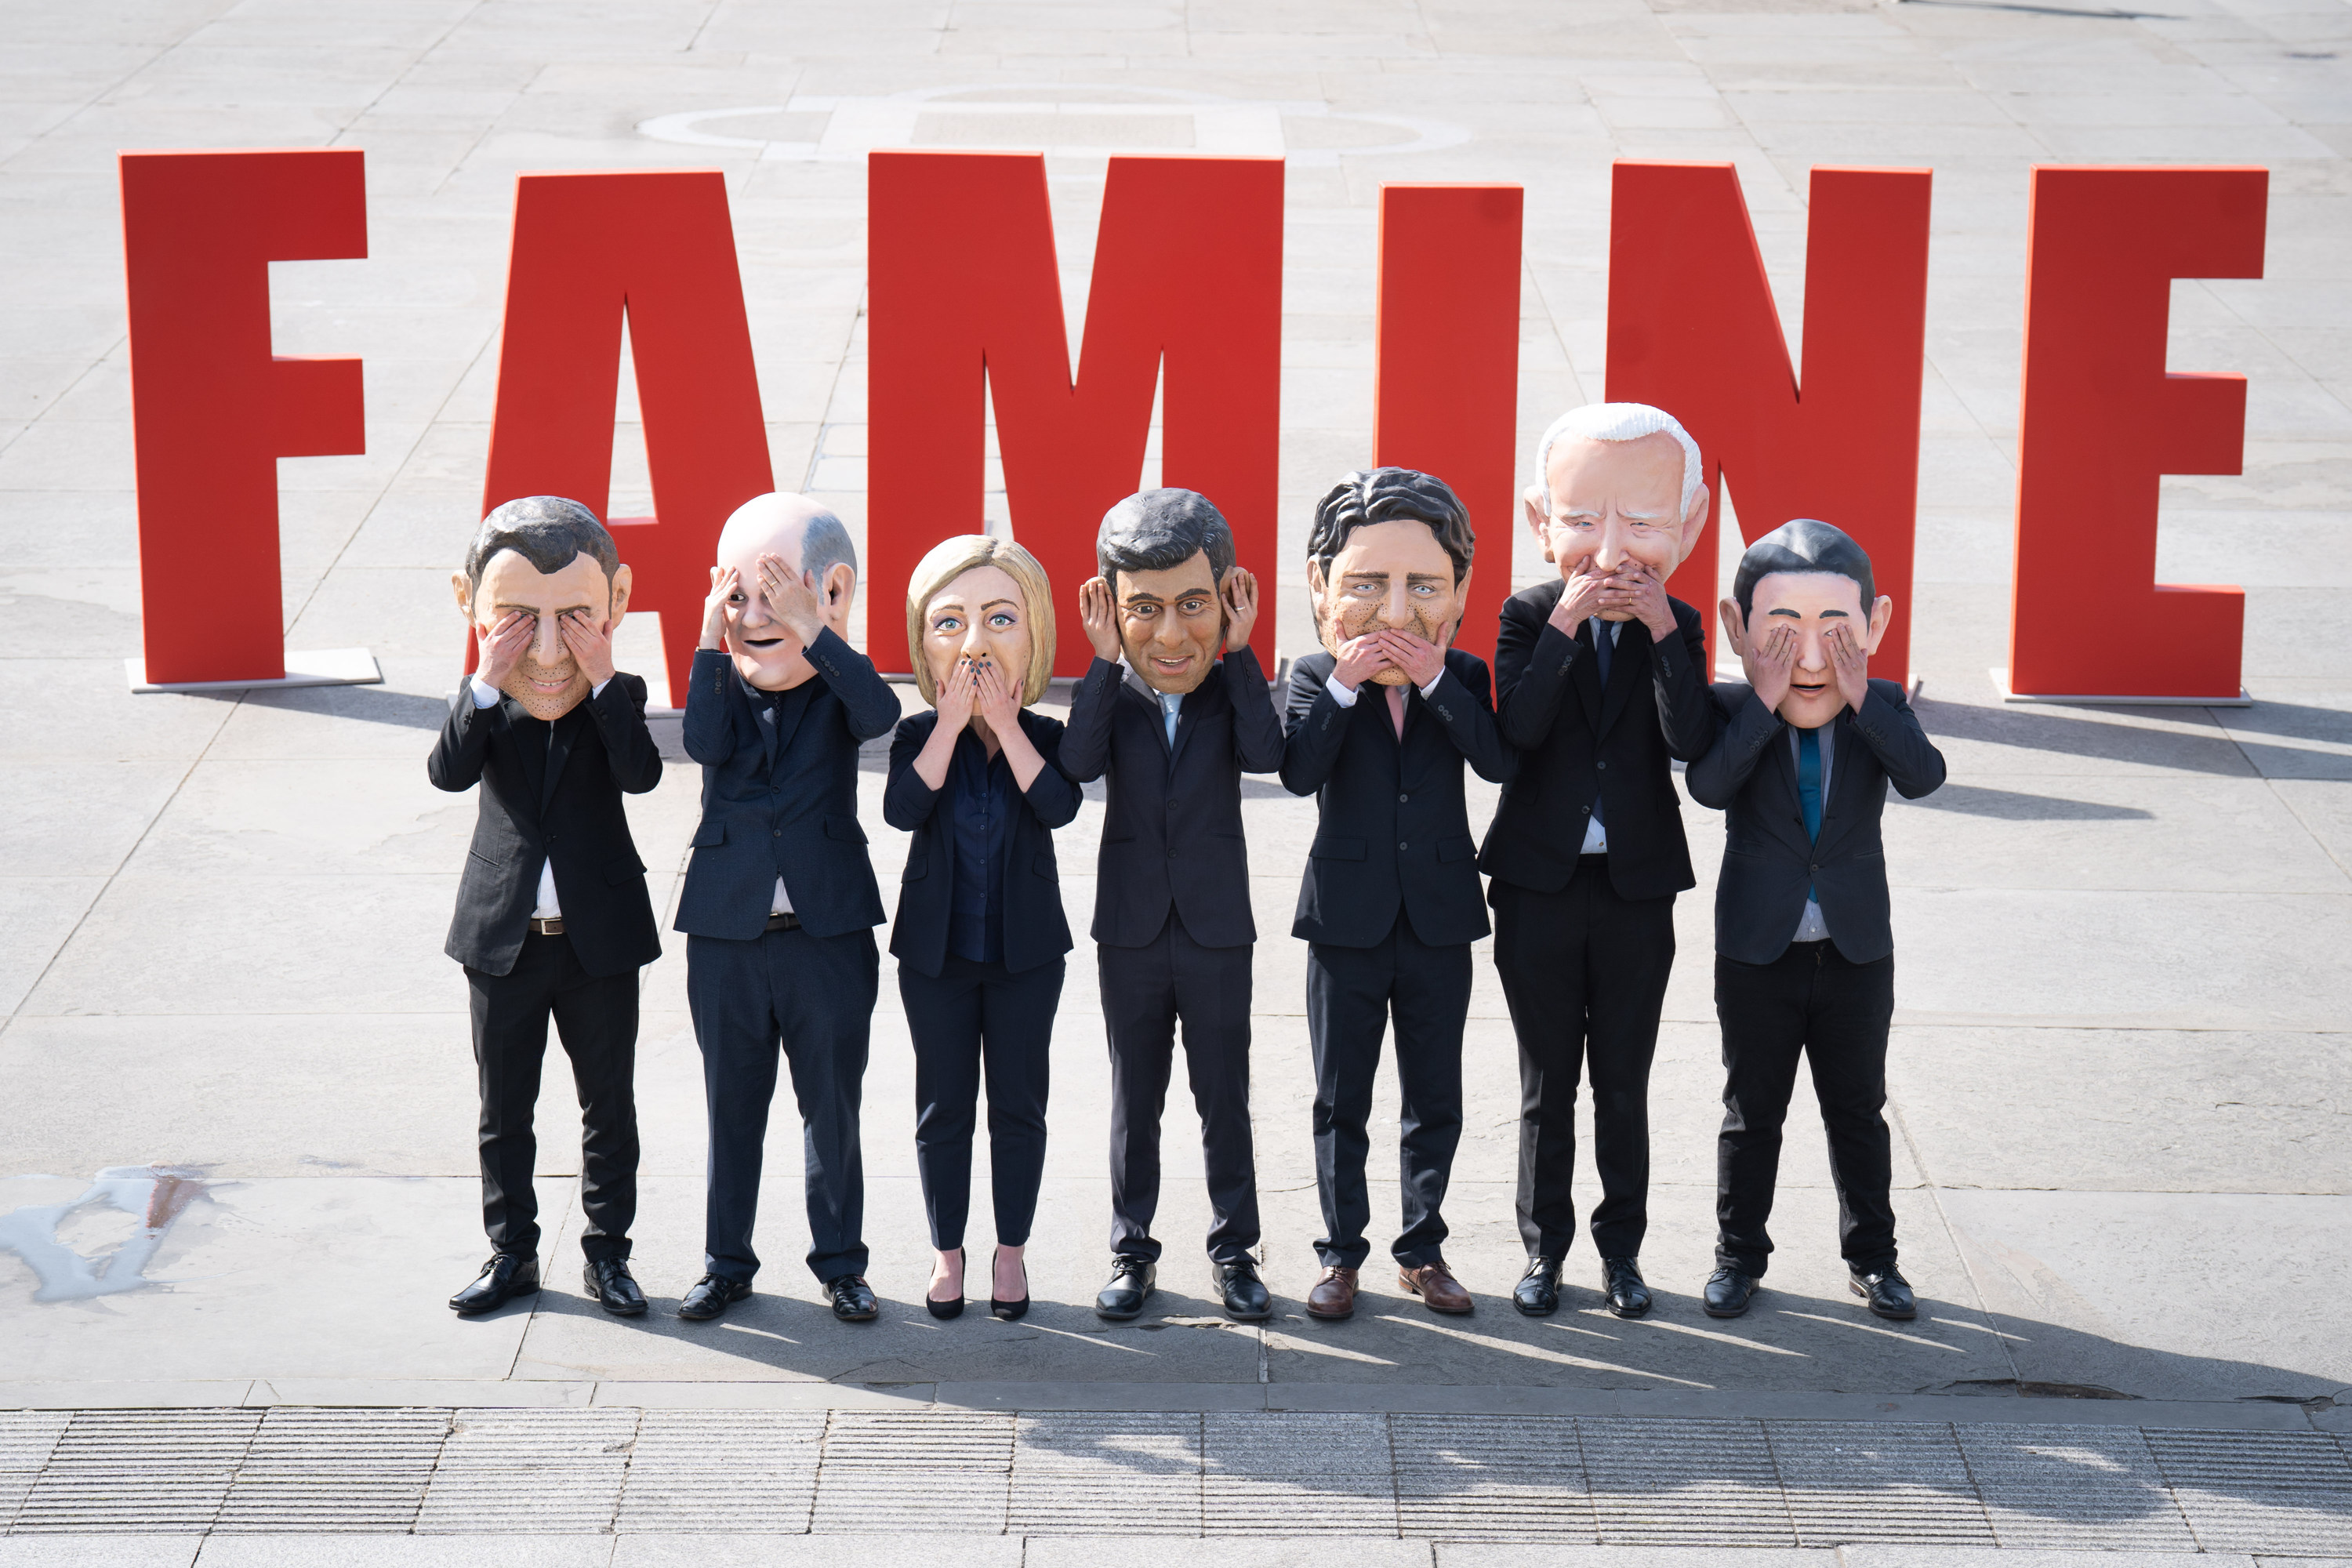 Oxfam activists dressed as G7 leaders protest against the lack of action to tackle the East Africa hunger crisis, on May 17 in London, ahead of the G7 summit in Japan. Photo: dpa